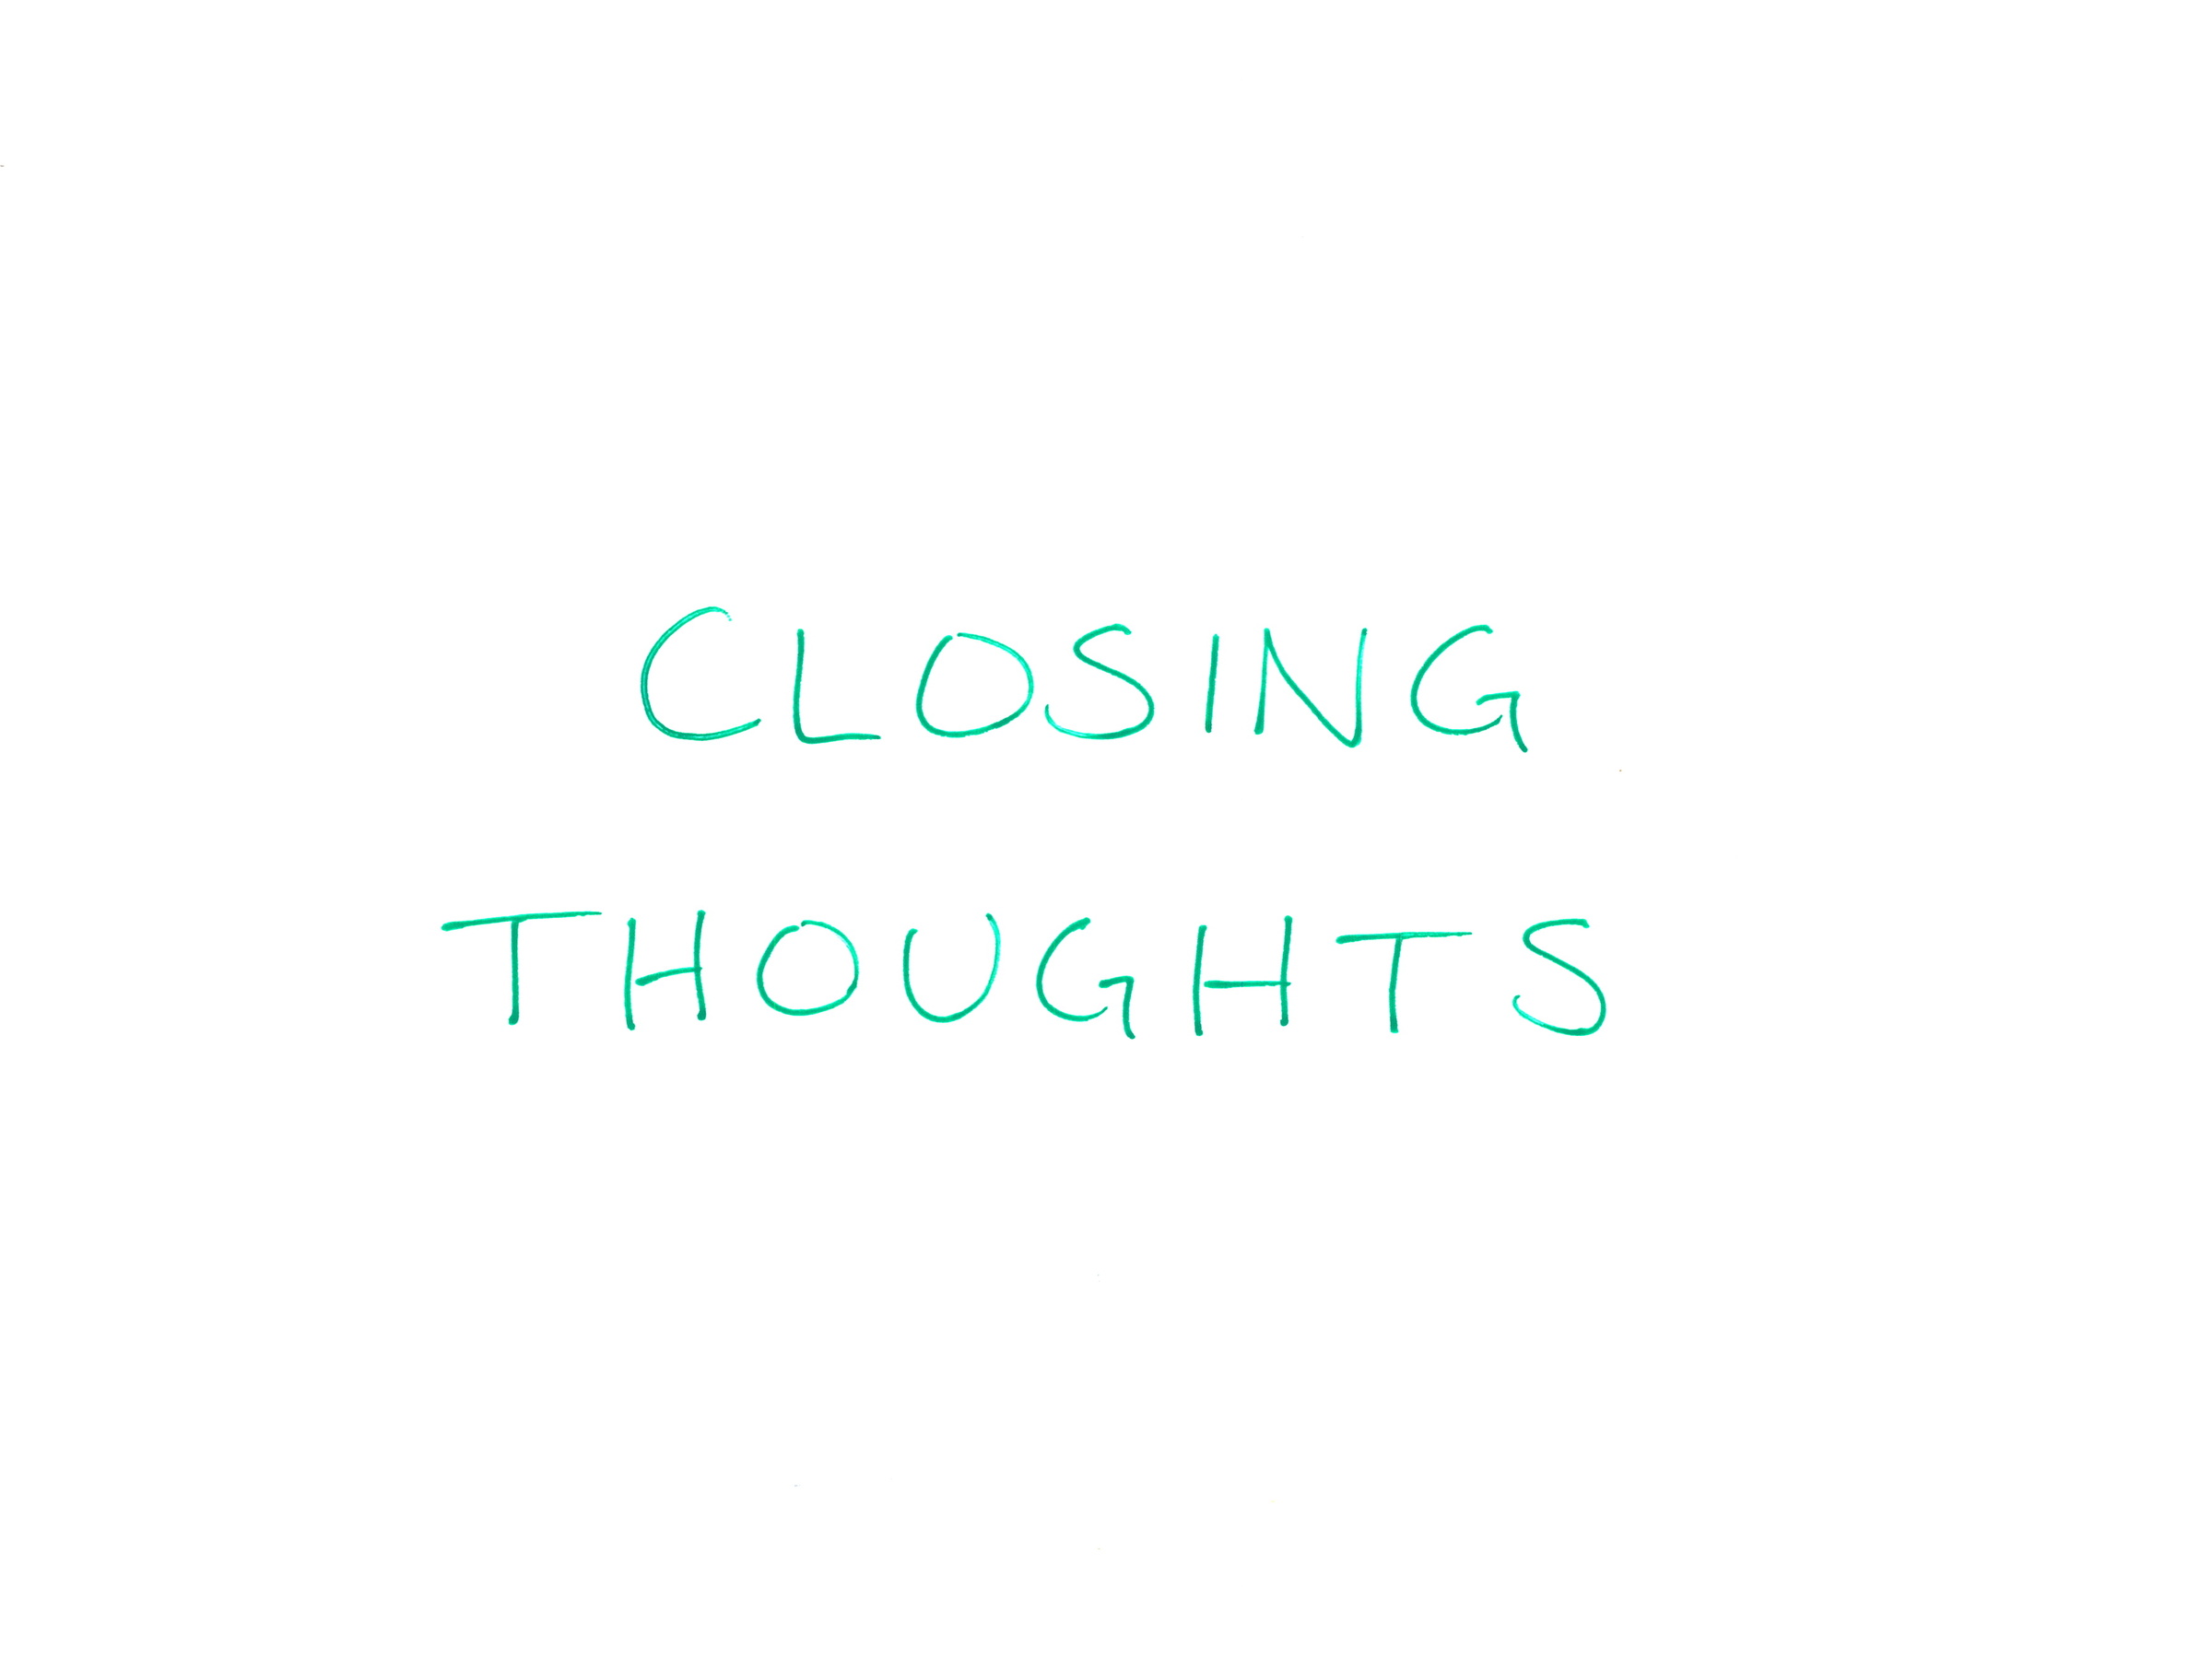 
CLOSING THOUGHTS
